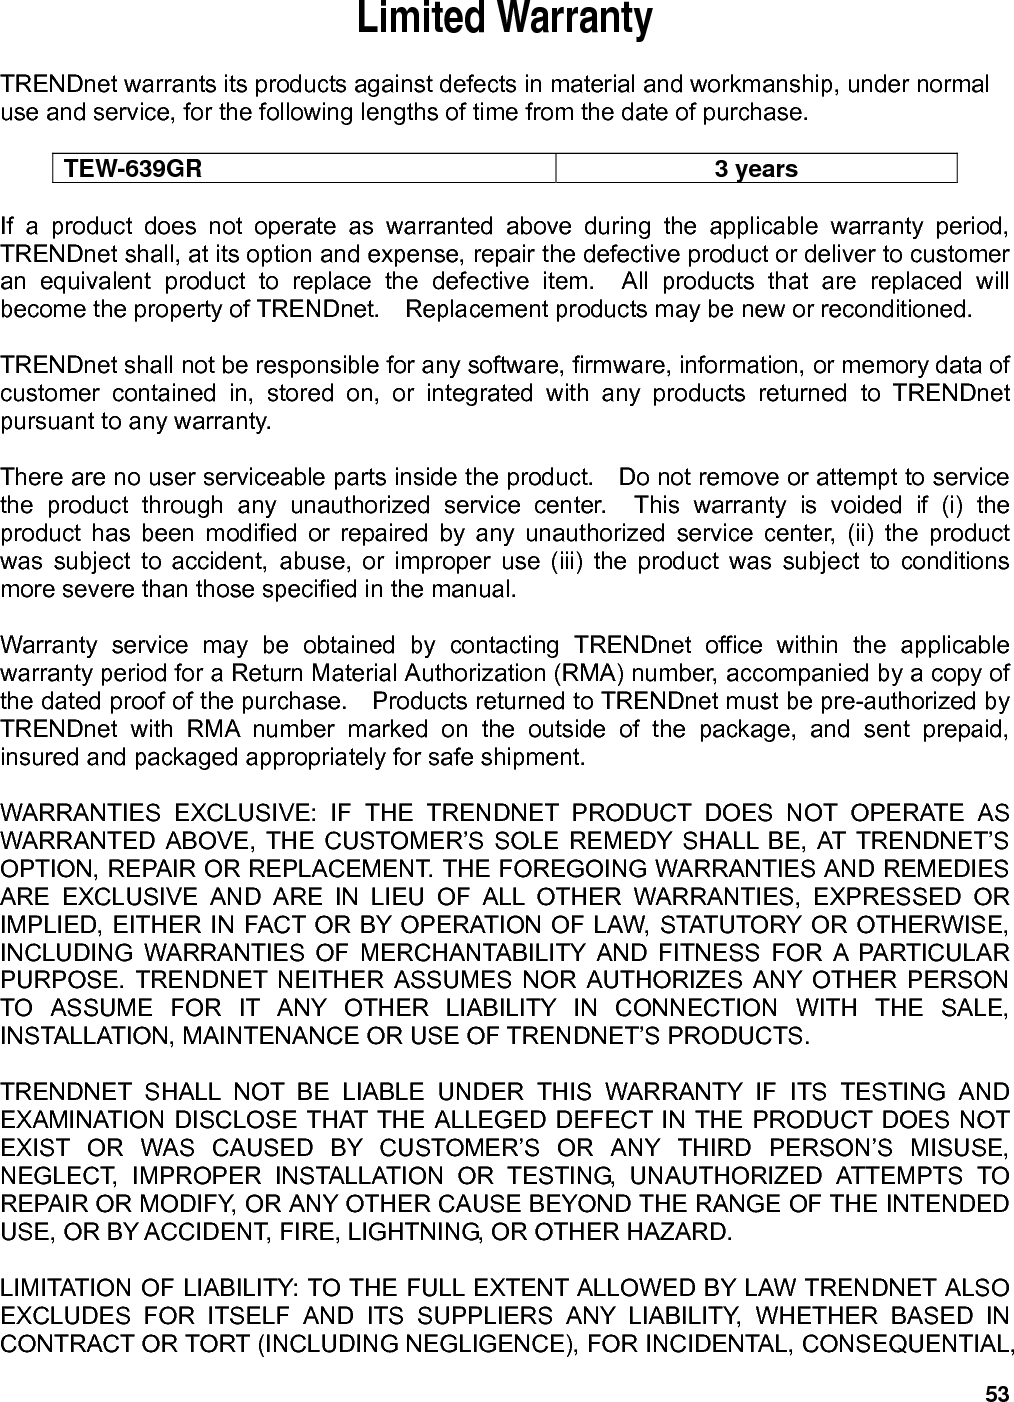 53 Limited Warranty  TRENDnet warrants its products against defects in material and workmanship, under normal use and service, for the following lengths of time from the date of purchase.      TEW-639GR 3 years  If a product does not operate as warranted above during the applicable warranty period, TRENDnet shall, at its option and expense, repair the defective product or deliver to customer an equivalent product to replace the defective item.  All products that are replaced will become the property of TRENDnet.    Replacement products may be new or reconditioned.  TRENDnet shall not be responsible for any software, firmware, information, or memory data of customer contained in, stored on, or integrated with any products returned to TRENDnet pursuant to any warranty.  There are no user serviceable parts inside the product.    Do not remove or attempt to service the product through any unauthorized service center.  This warranty is voided if (i) the product has been modified or repaired by any unauthorized service center, (ii) the product was subject to accident, abuse, or improper use (iii) the product was subject to conditions more severe than those specified in the manual.  Warranty service may be obtained by contacting TRENDnet office within the applicable warranty period for a Return Material Authorization (RMA) number, accompanied by a copy of the dated proof of the purchase.    Products returned to TRENDnet must be pre-authorized by TRENDnet with RMA number marked on the outside of the package, and sent prepaid, insured and packaged appropriately for safe shipment.      WARRANTIES EXCLUSIVE: IF THE TRENDNET PRODUCT DOES NOT OPERATE AS WARRANTED ABOVE, THE CUSTOMER’S SOLE REMEDY SHALL BE, AT TRENDNET’S OPTION, REPAIR OR REPLACEMENT. THE FOREGOING WARRANTIES AND REMEDIES ARE EXCLUSIVE AND ARE IN LIEU OF ALL OTHER WARRANTIES, EXPRESSED OR IMPLIED, EITHER IN FACT OR BY OPERATION OF LAW, STATUTORY OR OTHERWISE, INCLUDING WARRANTIES OF MERCHANTABILITY AND FITNESS FOR A PARTICULAR PURPOSE. TRENDNET NEITHER ASSUMES NOR AUTHORIZES ANY OTHER PERSON TO ASSUME FOR IT ANY OTHER LIABILITY IN CONNECTION WITH THE SALE, INSTALLATION, MAINTENANCE OR USE OF TRENDNET’S PRODUCTS.  TRENDNET SHALL NOT BE LIABLE UNDER THIS WARRANTY IF ITS TESTING AND EXAMINATION DISCLOSE THAT THE ALLEGED DEFECT IN THE PRODUCT DOES NOT EXIST OR WAS CAUSED BY CUSTOMER’S OR ANY THIRD PERSON’S MISUSE, NEGLECT, IMPROPER INSTALLATION OR TESTING, UNAUTHORIZED ATTEMPTS TO REPAIR OR MODIFY, OR ANY OTHER CAUSE BEYOND THE RANGE OF THE INTENDED USE, OR BY ACCIDENT, FIRE, LIGHTNING, OR OTHER HAZARD.  LIMITATION OF LIABILITY: TO THE FULL EXTENT ALLOWED BY LAW TRENDNET ALSO EXCLUDES FOR ITSELF AND ITS SUPPLIERS ANY LIABILITY, WHETHER BASED IN CONTRACT OR TORT (INCLUDING NEGLIGENCE), FOR INCIDENTAL, CONSEQUENTIAL, 